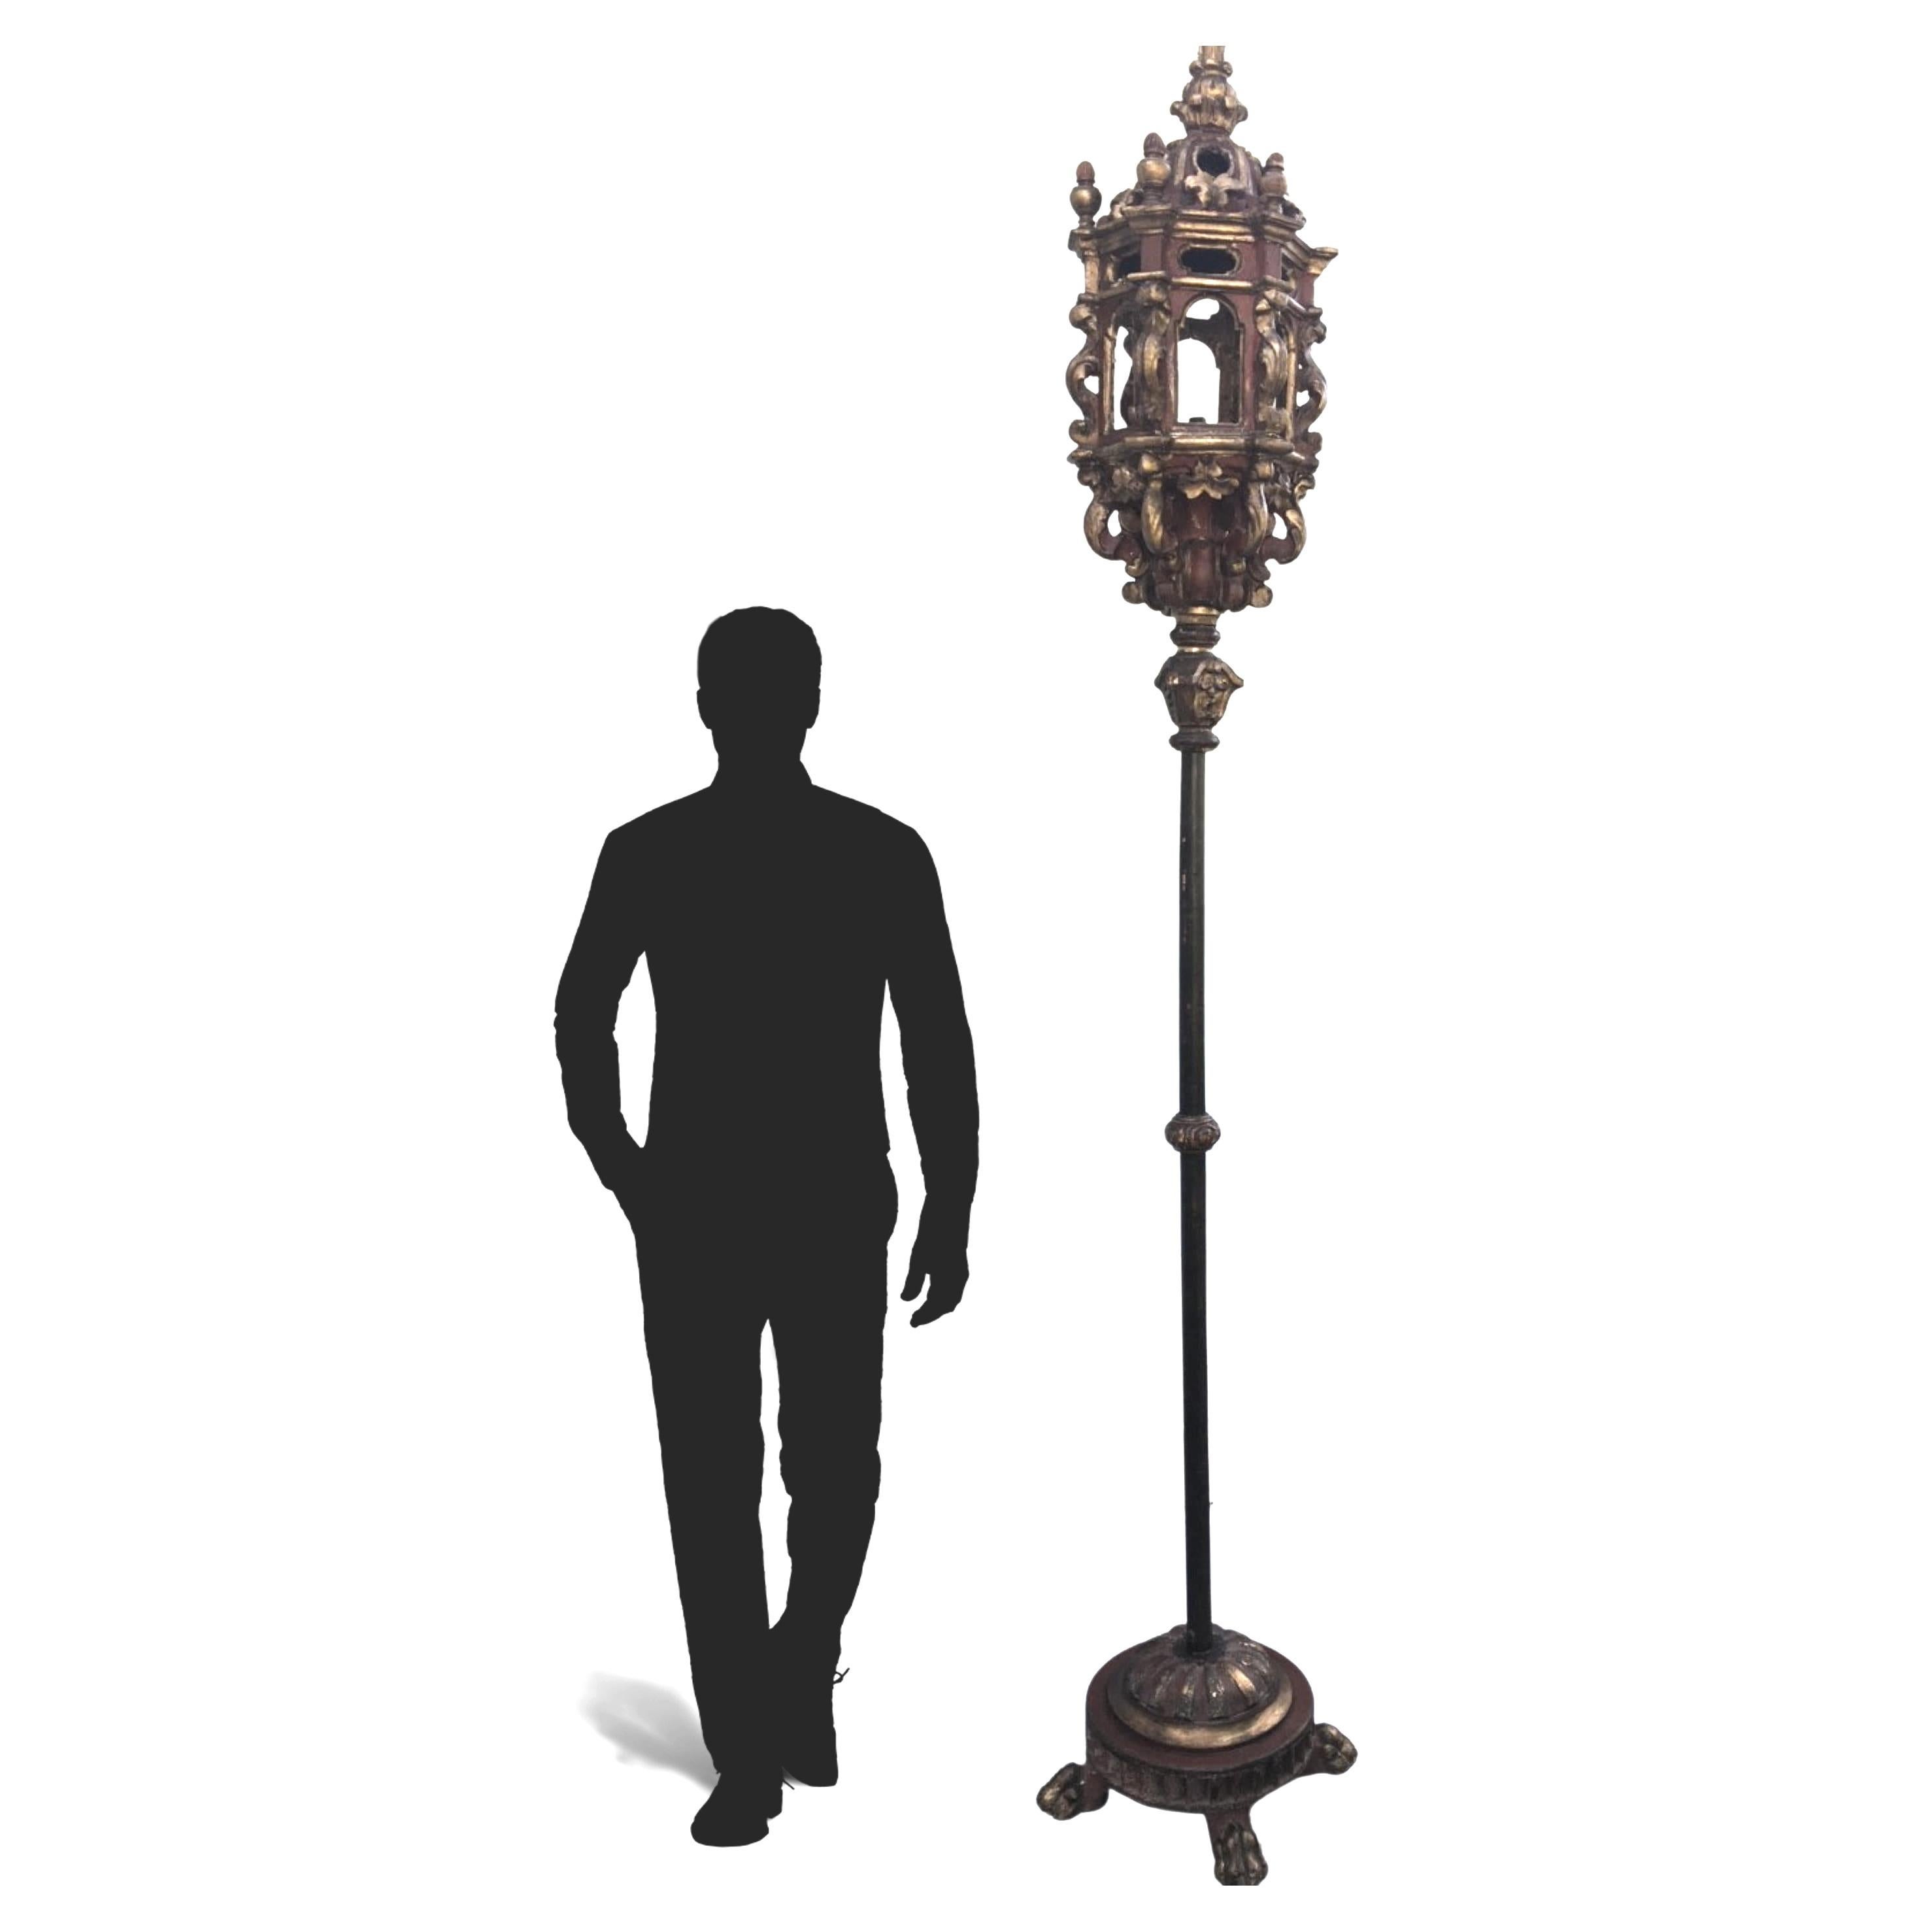 17th century large six sided Venetian carved gilded Baroque hall lantern.

This 17th century hand carved red polychrome and gilded wood lantern, mounted on a pole with a lion paw base, represents the highest standards of craftsmanship. This very